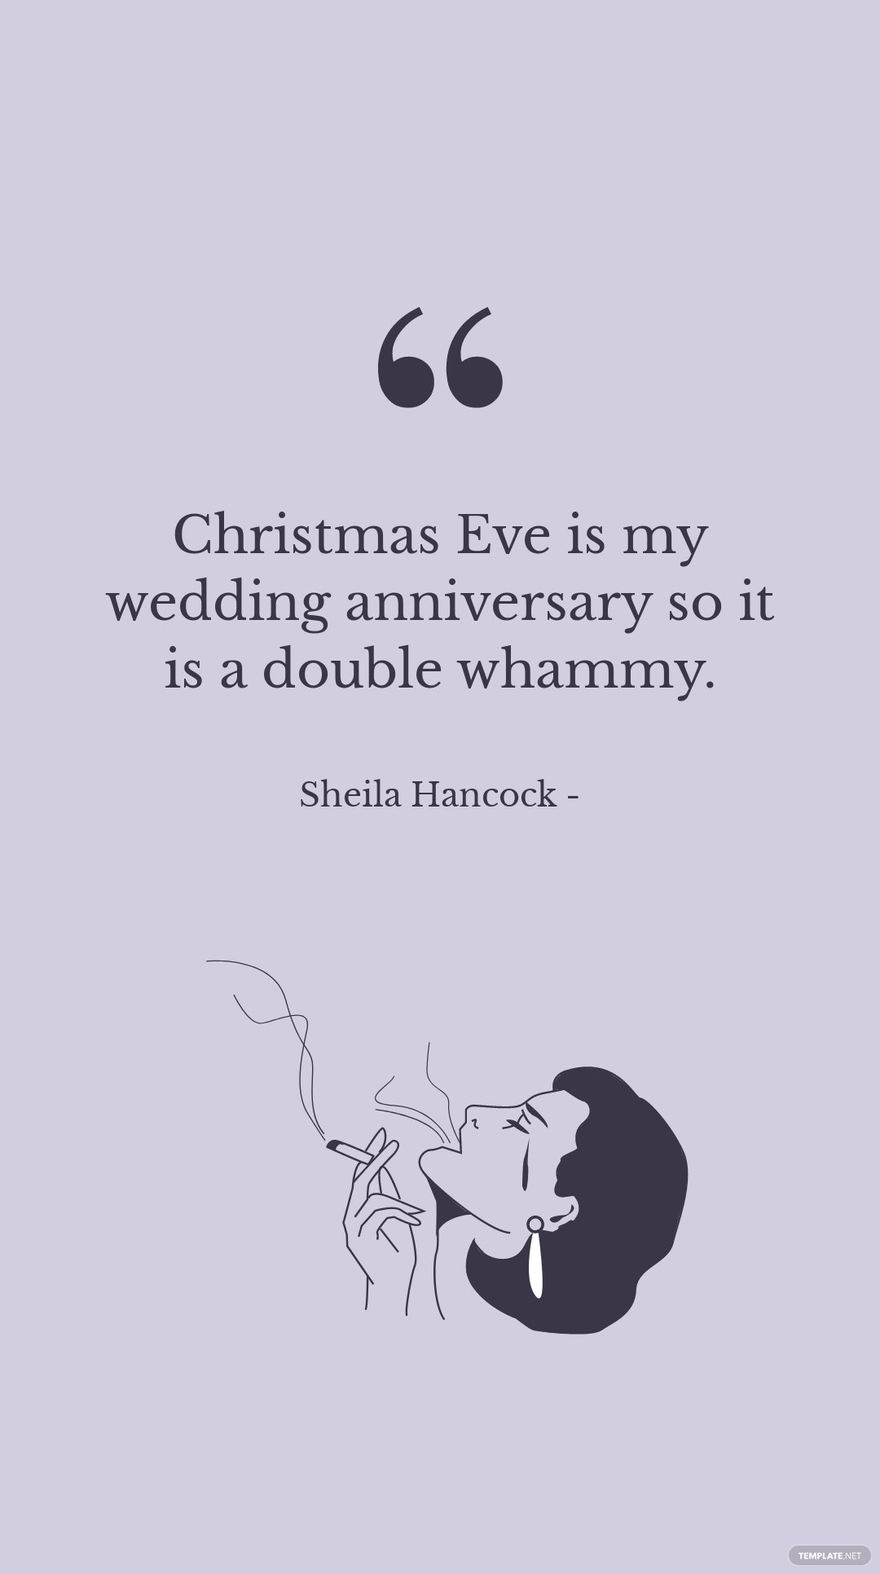 Sheila Hancock - Christmas Eve is my wedding anniversary so it is a double whammy.